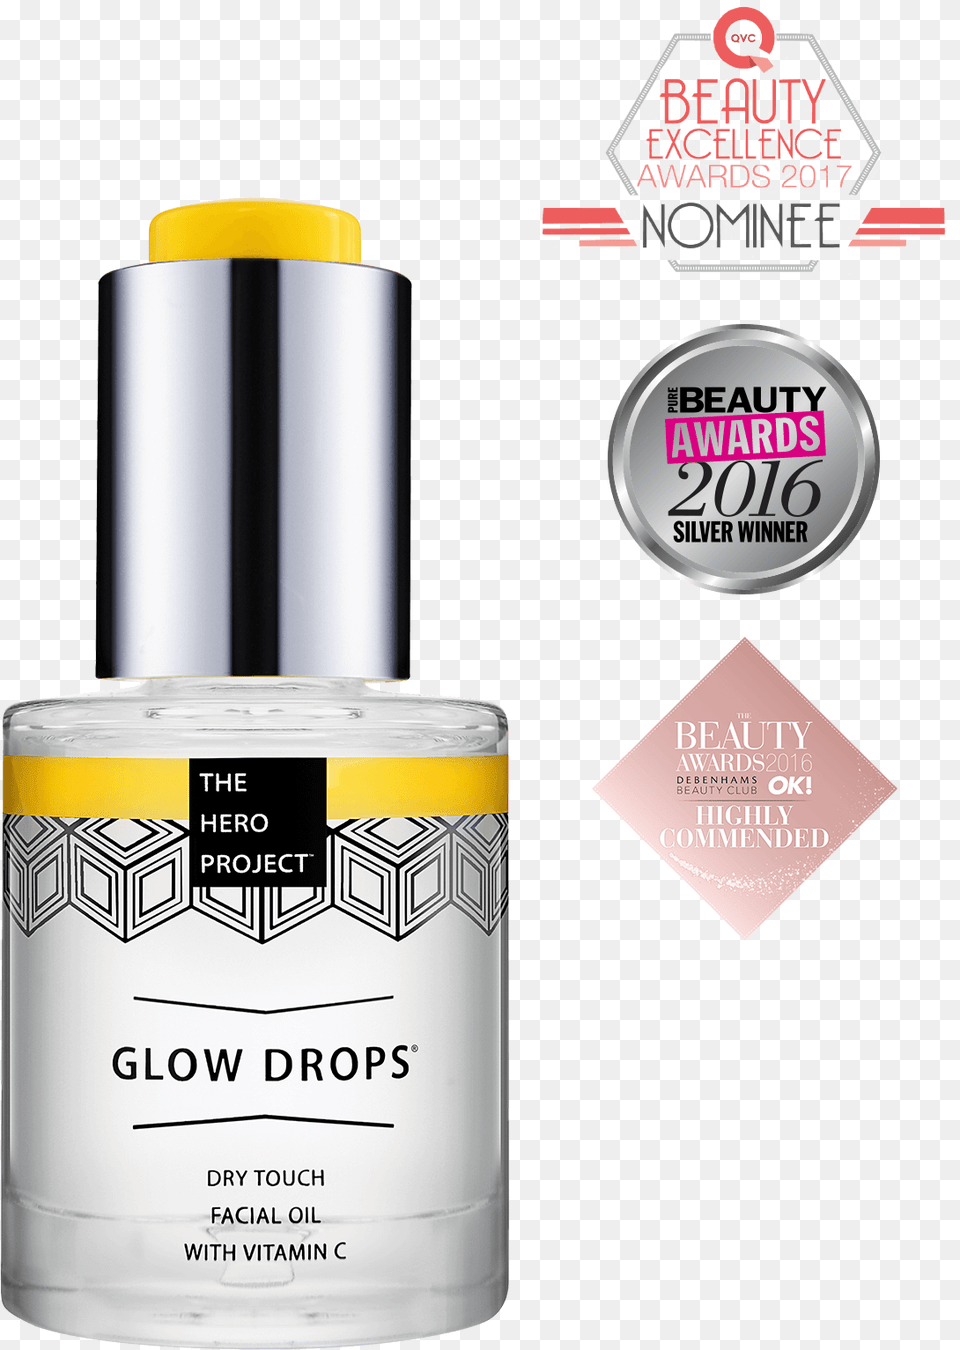 Glow Drops Bottle The Hero Project Glow Drops Dry Touch Facial Oil, Cosmetics, Perfume, Tape, Can Free Png Download